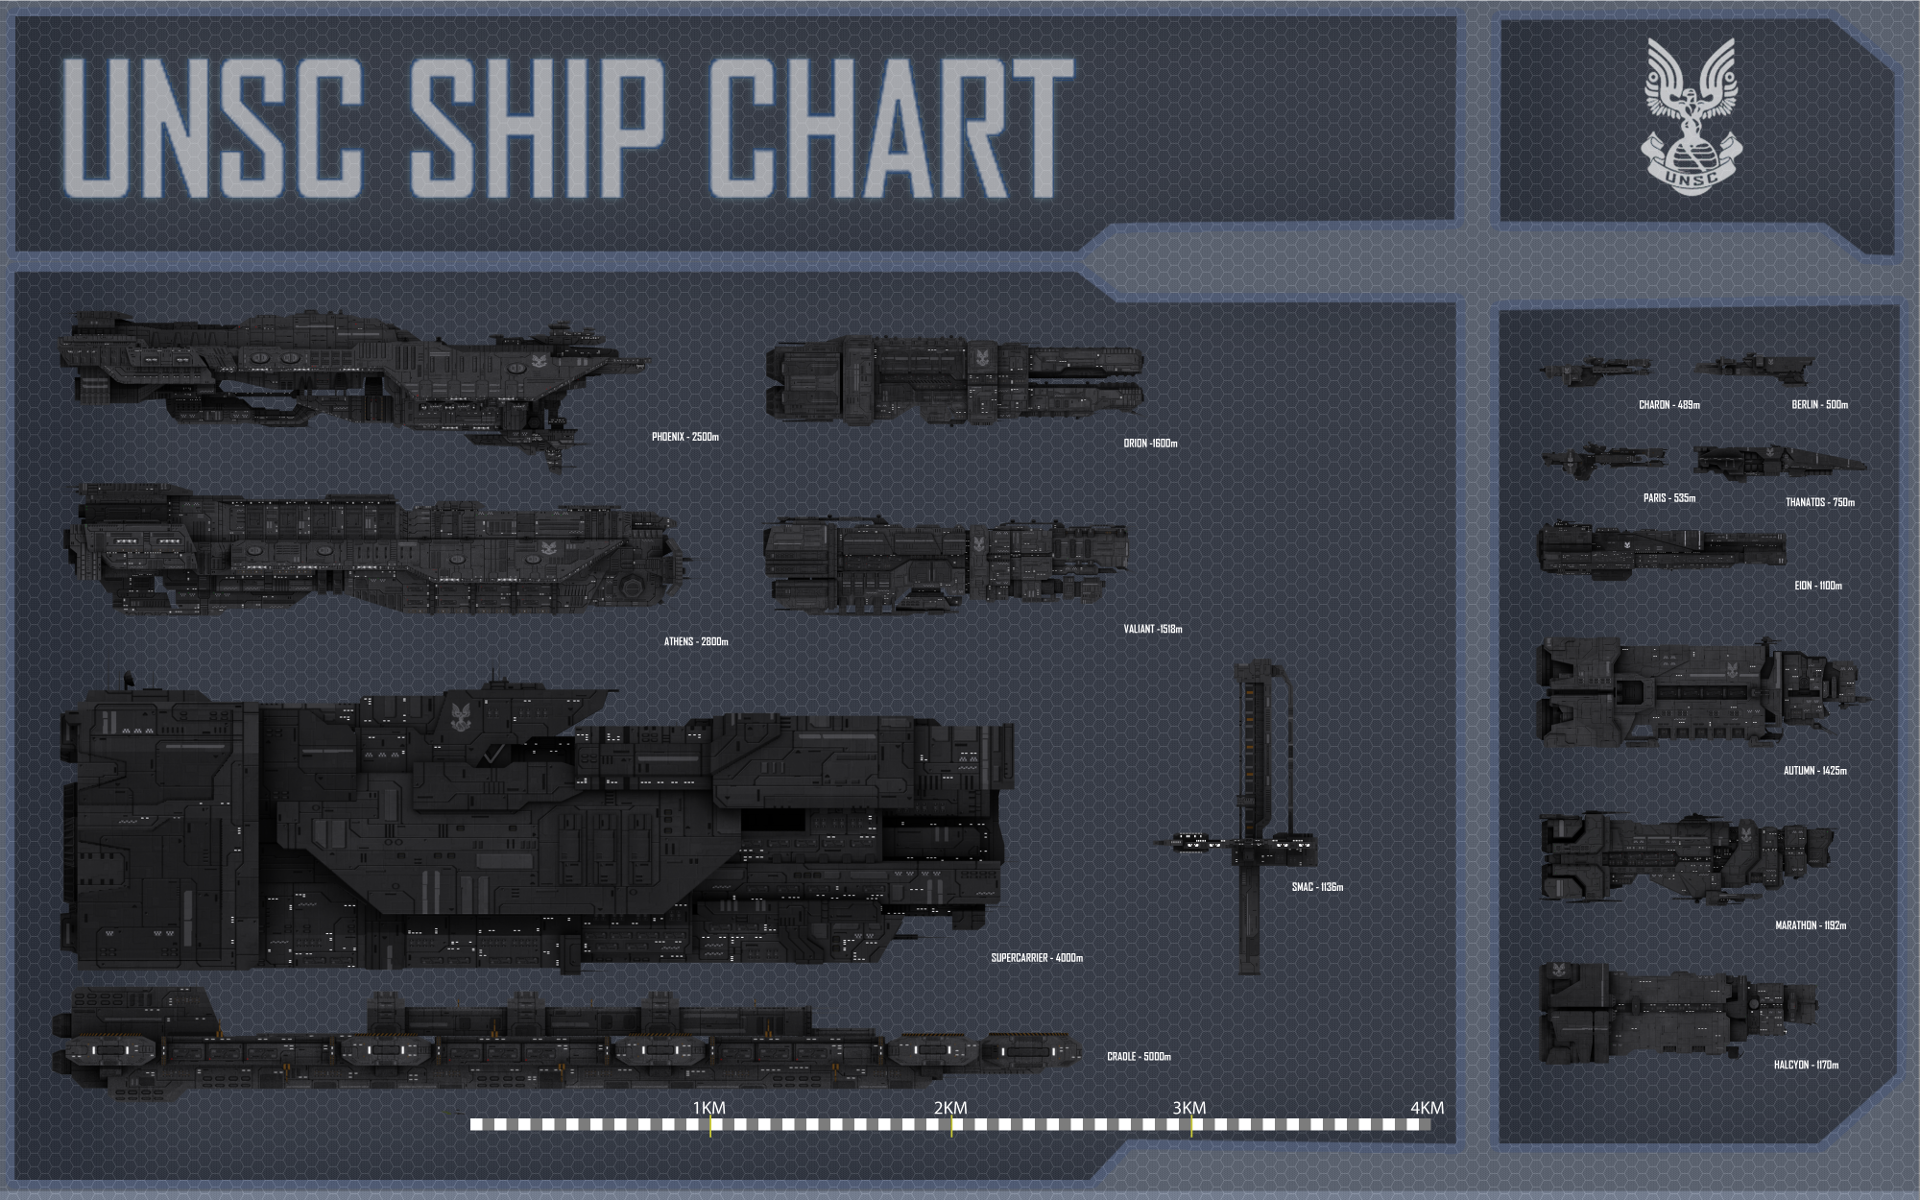 https://static.wikia.nocookie.net/sotp/images/0/04/Ship_Chart_fixed1920.png/revision/latest?cb=20140720054115